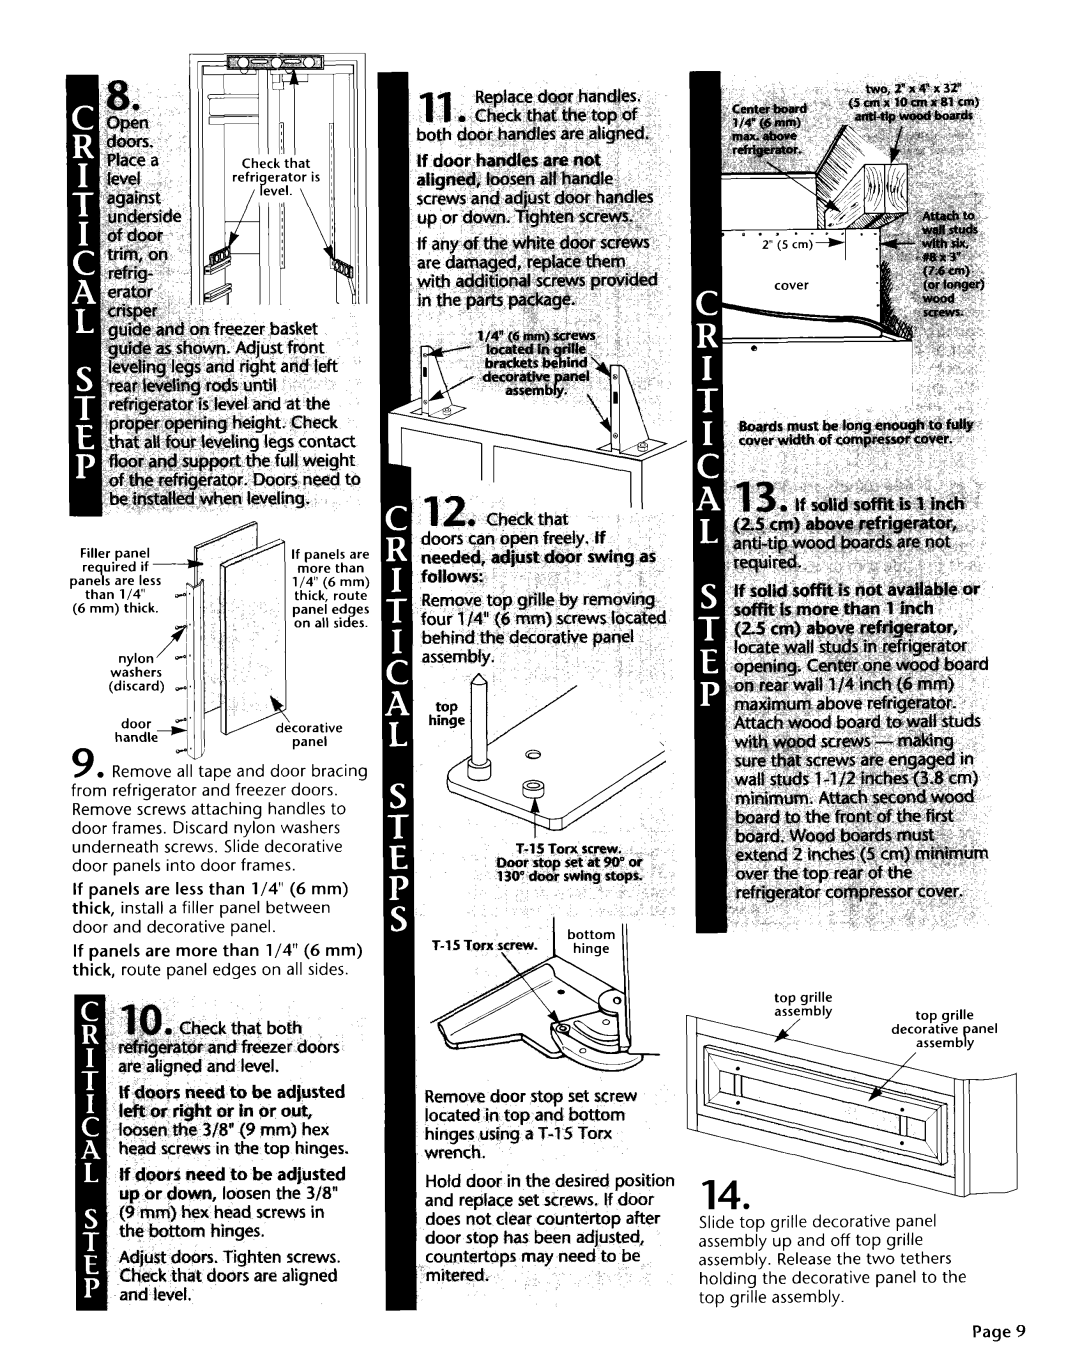 KitchenAid 2004022 installation instructions lf4~~~s iwsd ta be adjusted kbr fight or bl or out, Remove door stop set screw 